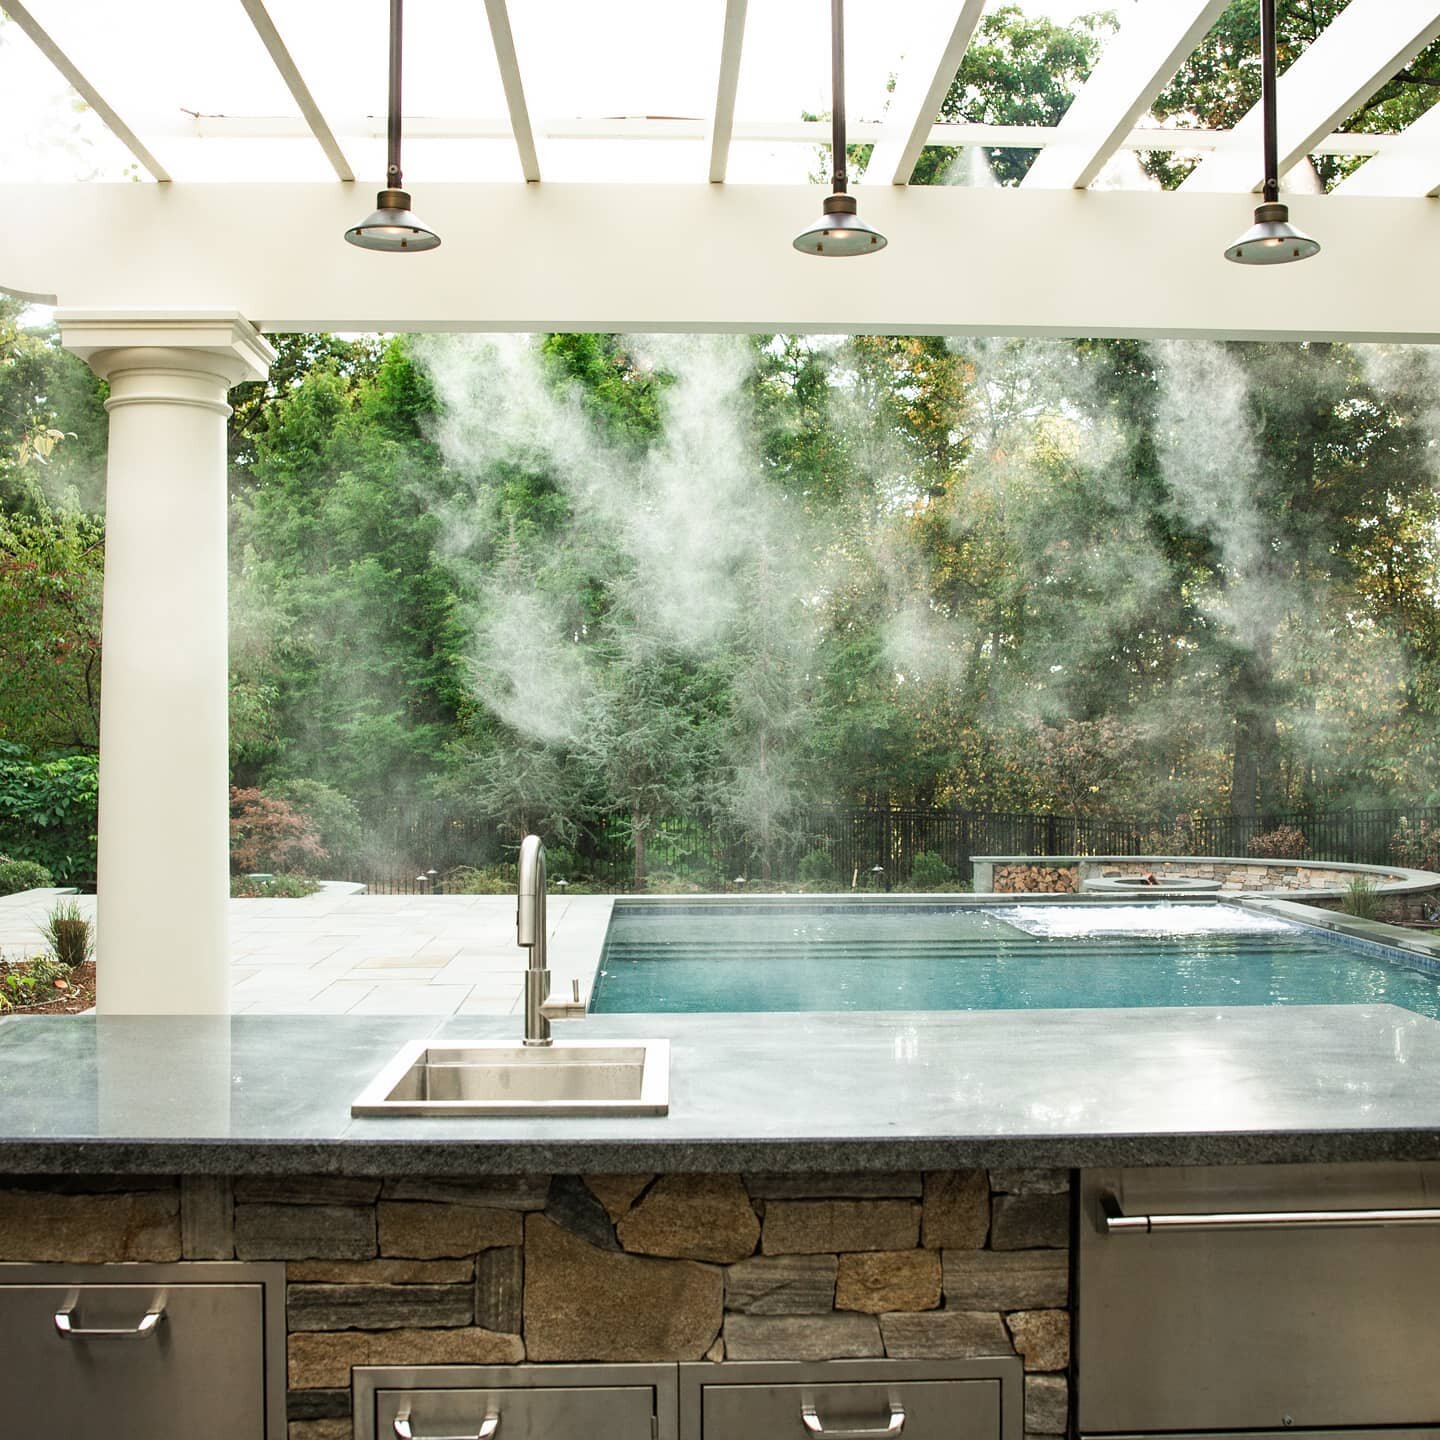 This outdoor kitchen is built for these hot summer days and has a complete line up of Lynx appliances. The overhanging pergola with a built-in misting system provides a break from the sun and humidity. #outdoorliving